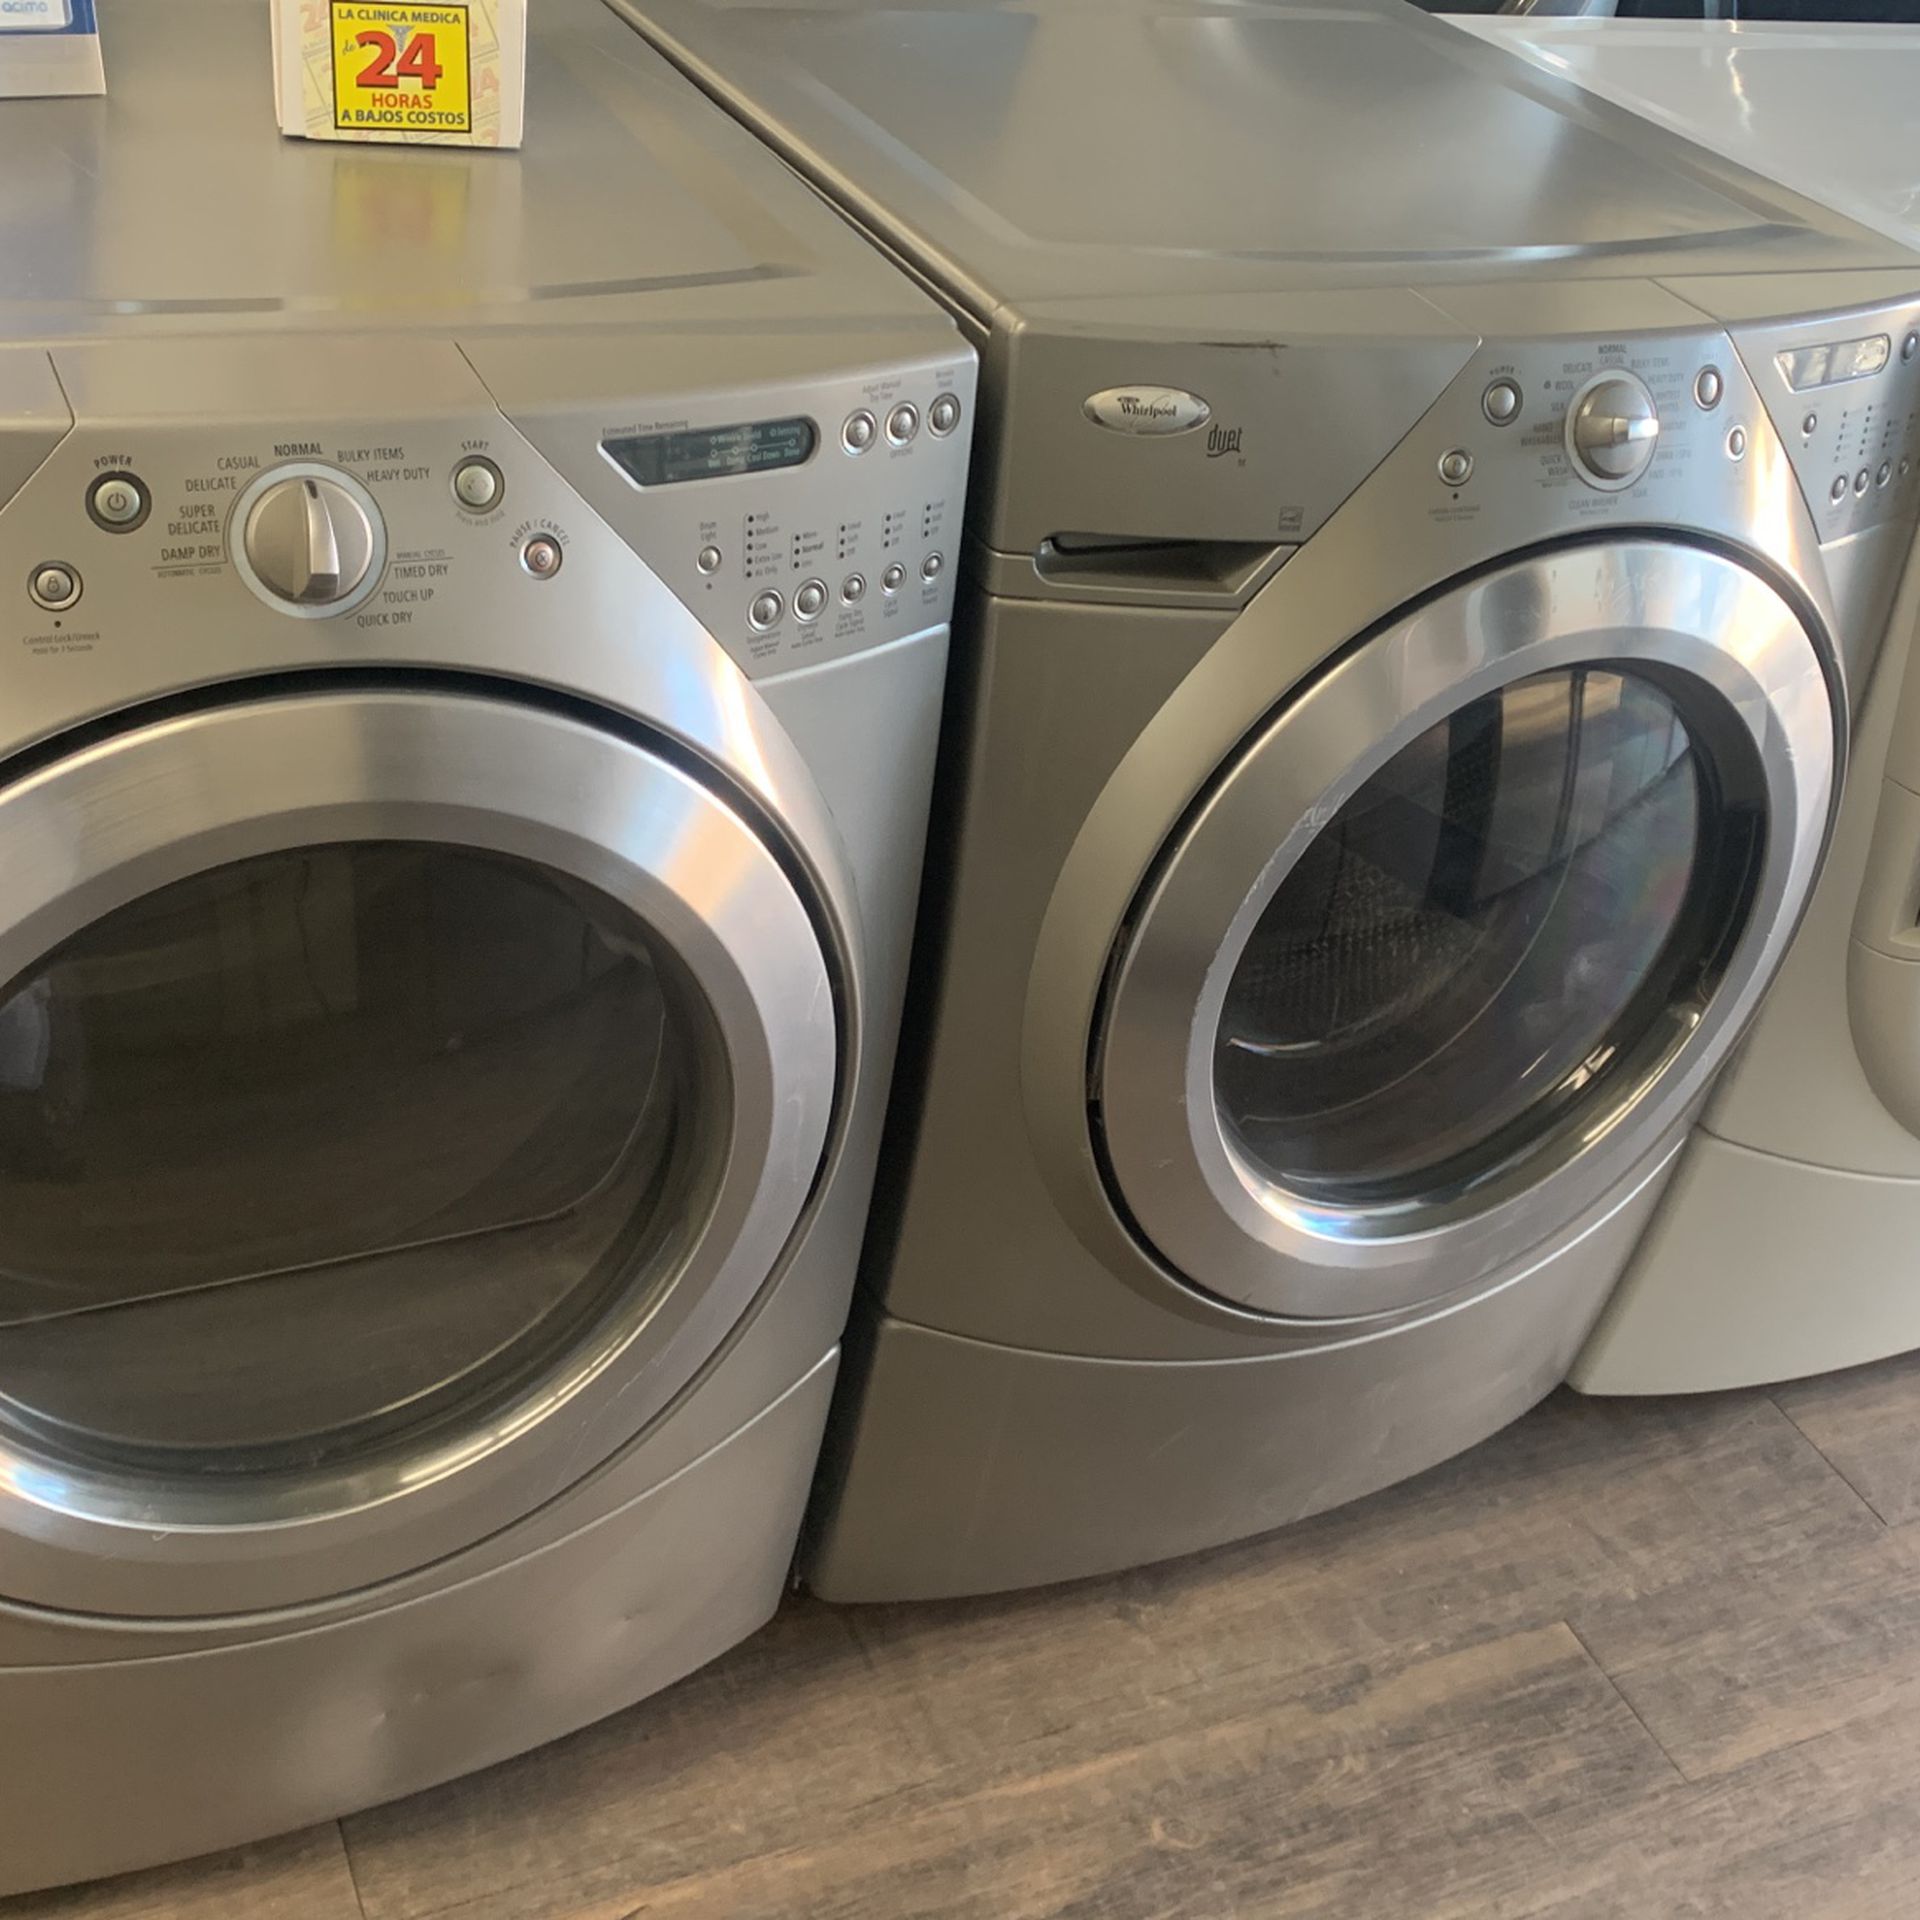 WHIRLPOOL DUET FRONT LOAD WASHER AND GAS DRYER SET